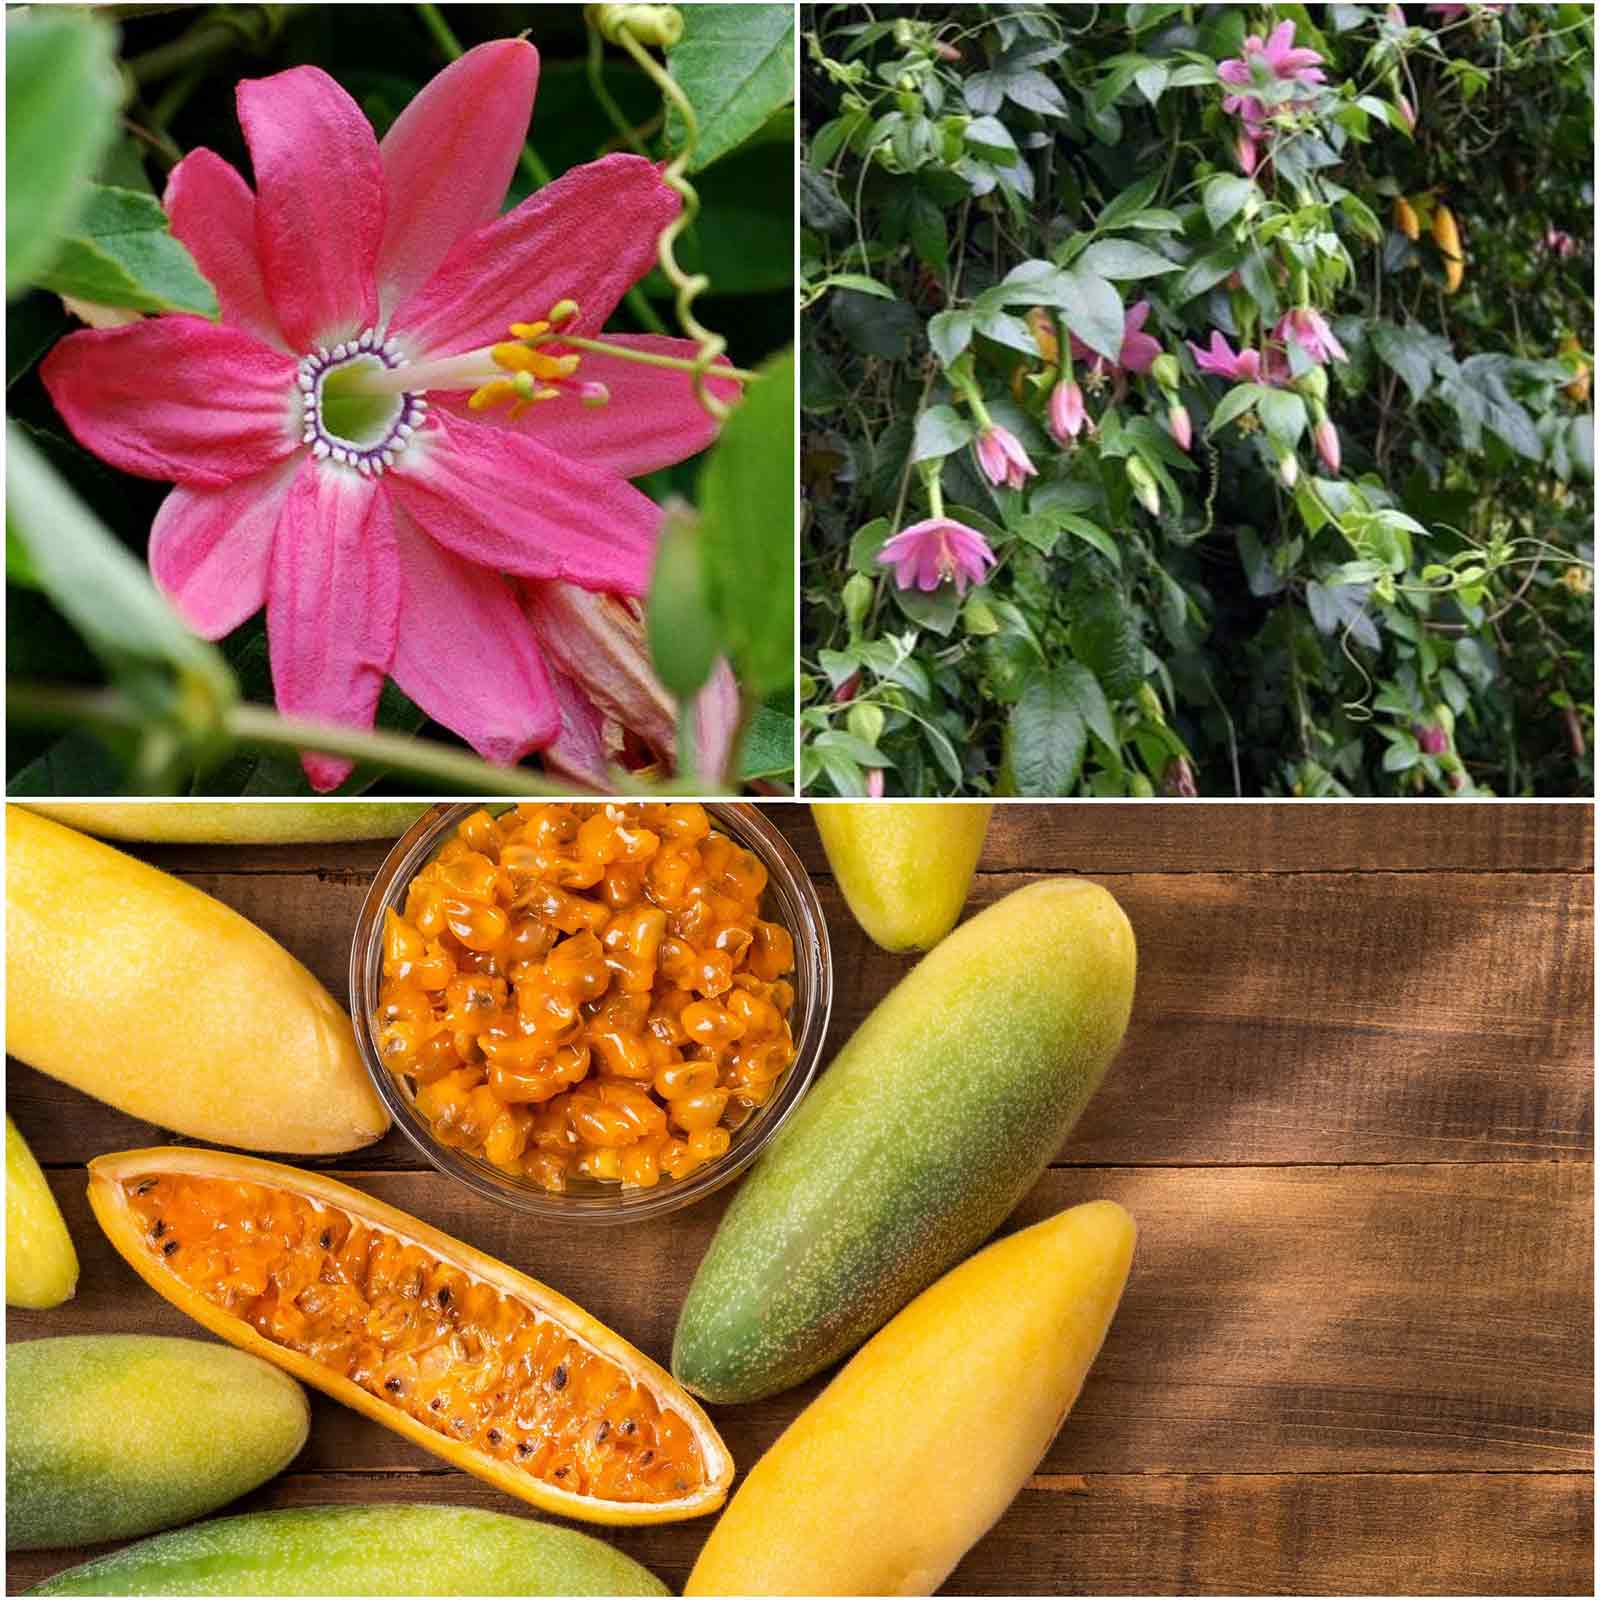 Passiflora Seeds - Banana Passion Fruit - Packet, Blue, Flower Seeds, Eden Brothers